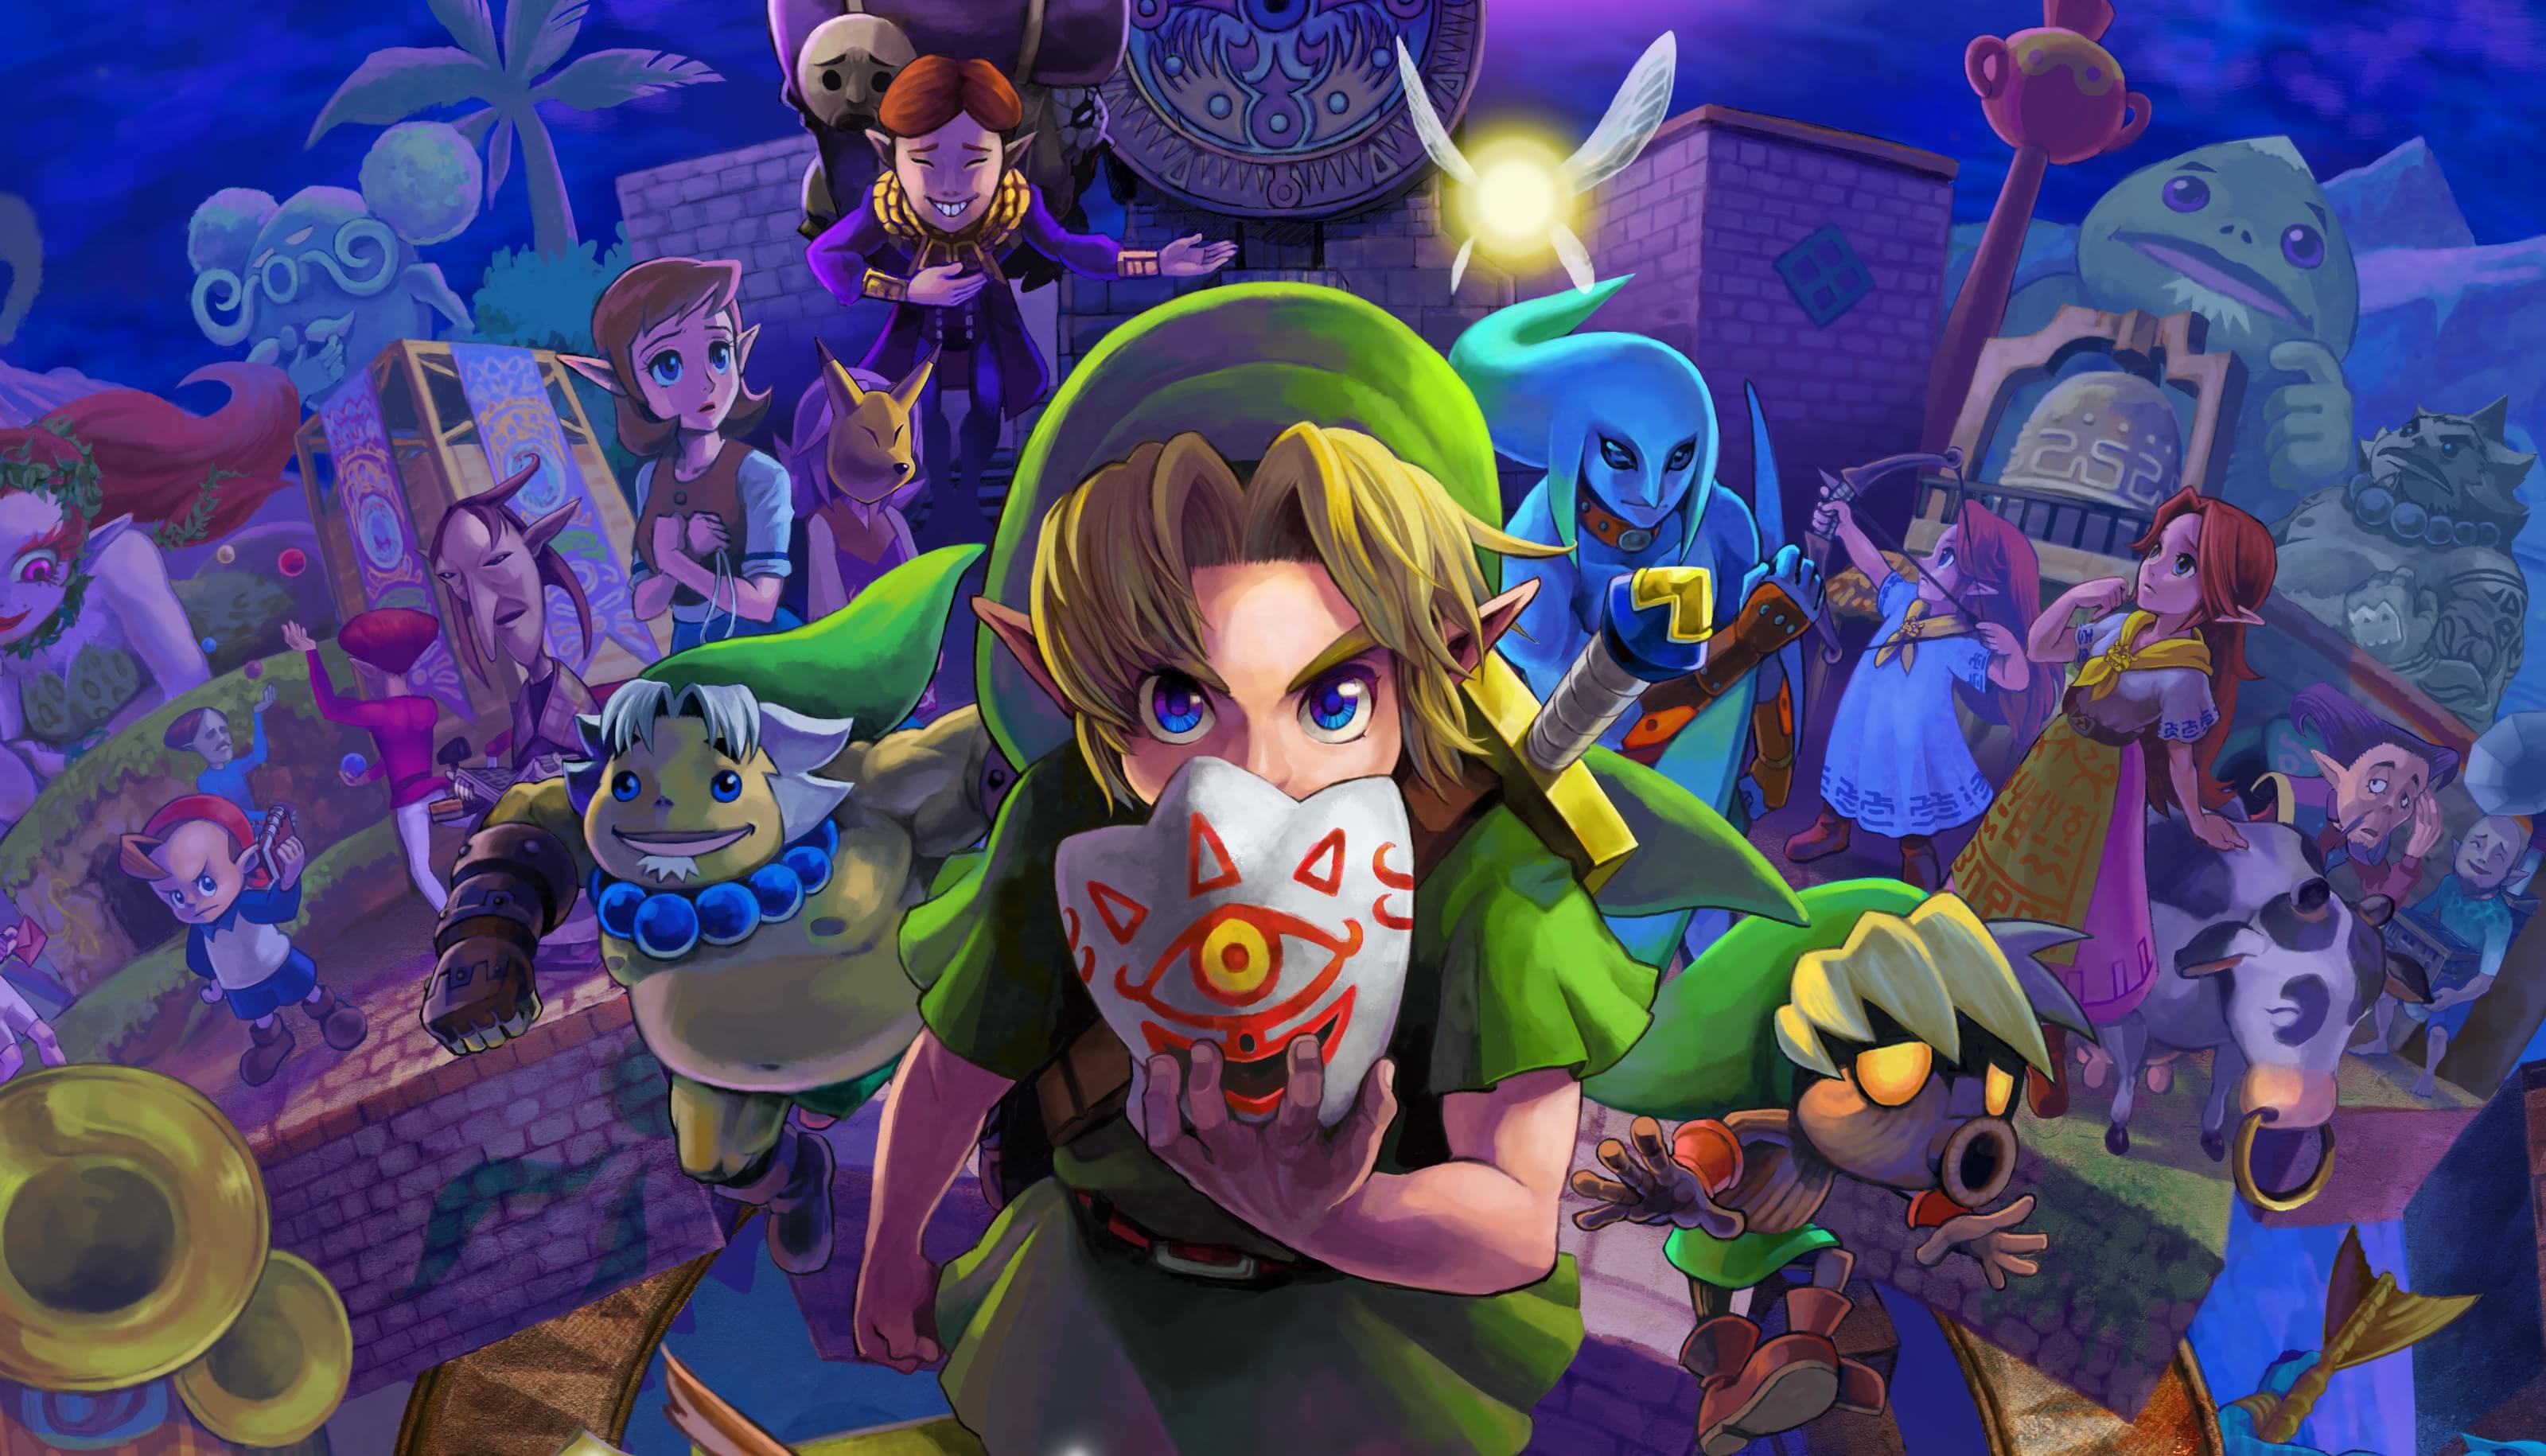 General 3200x1830 The Legend of Zelda: Majora's Mask The Legend of Zelda Link Happy Mask Salesman Anju Cremia green tunic video game characters Nintendo video games mask looking at viewer